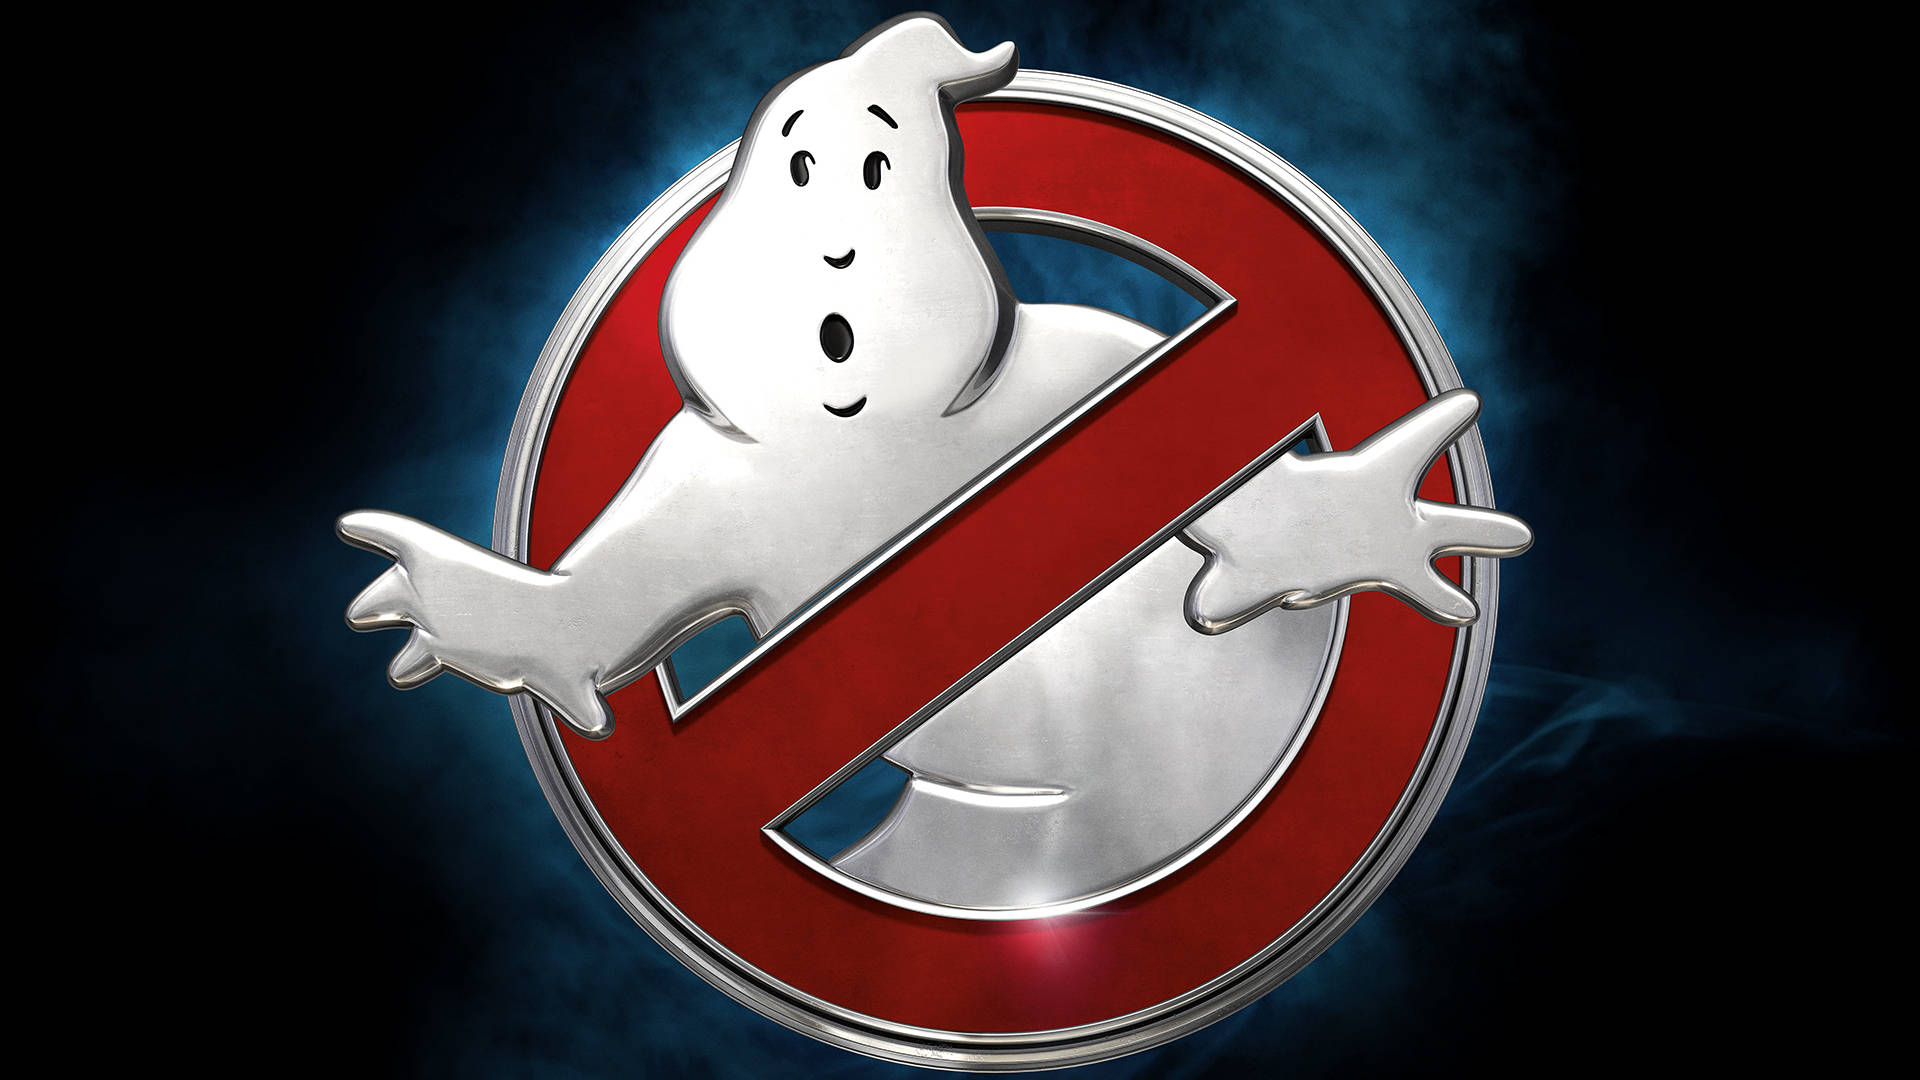 Ghostbusters Wallpaper Images